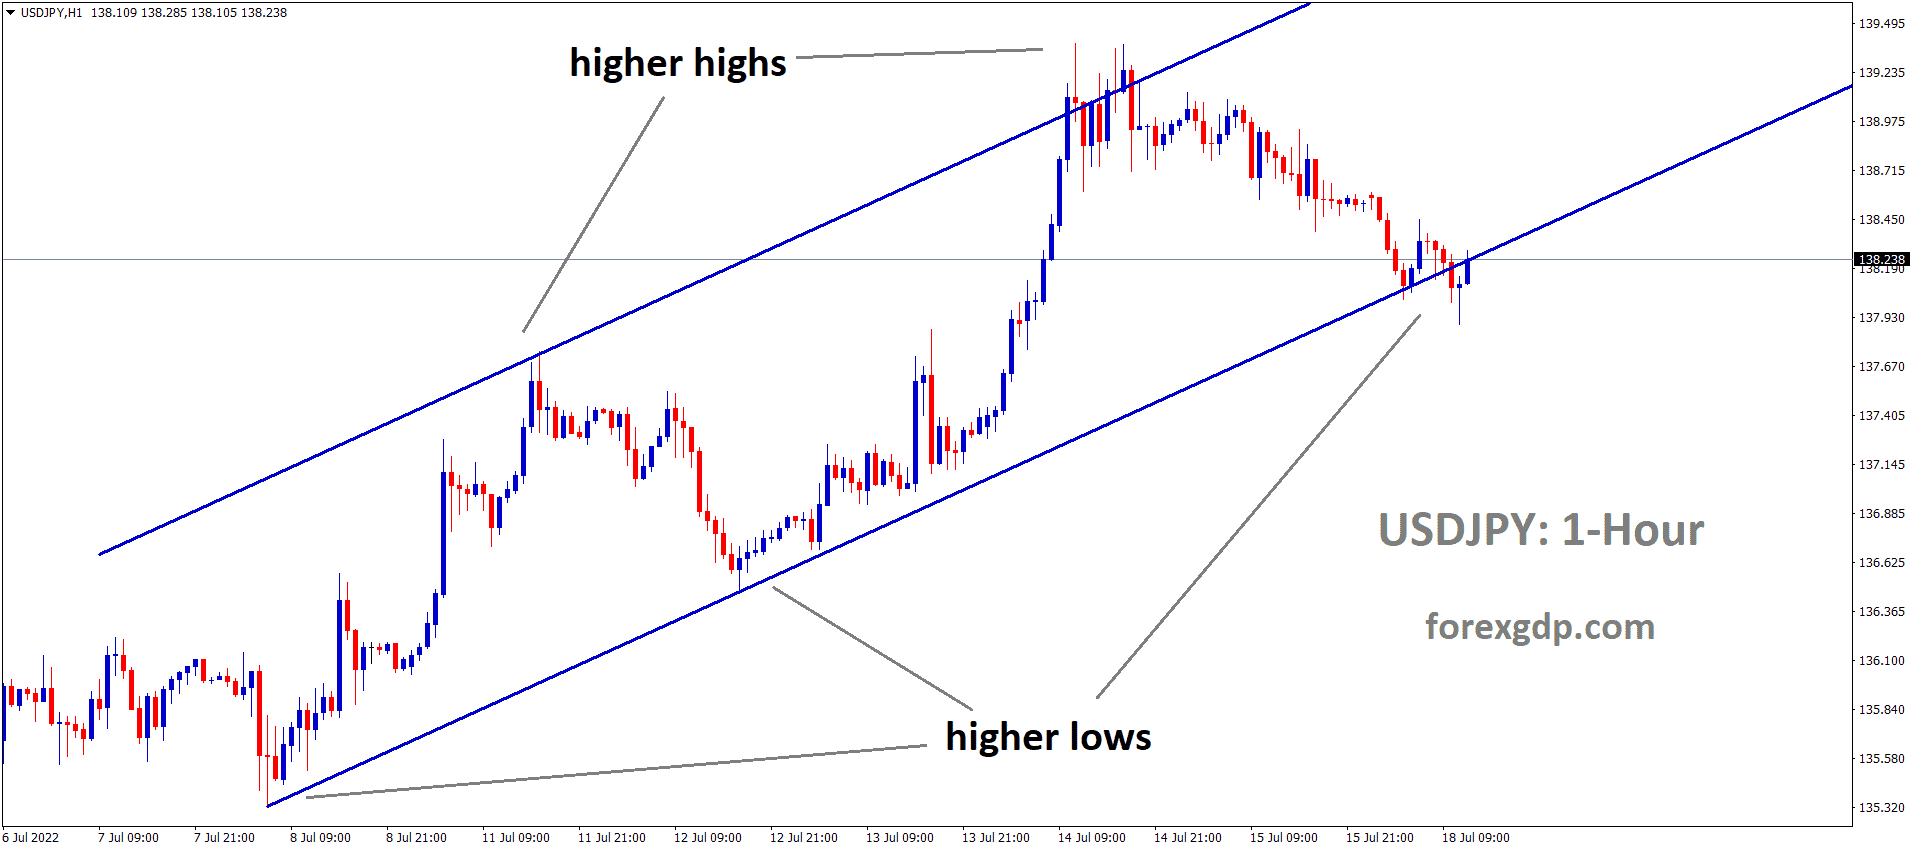 USDJPY is moving in an Ascending channel and the market has rebounded from the higher low area of the channel